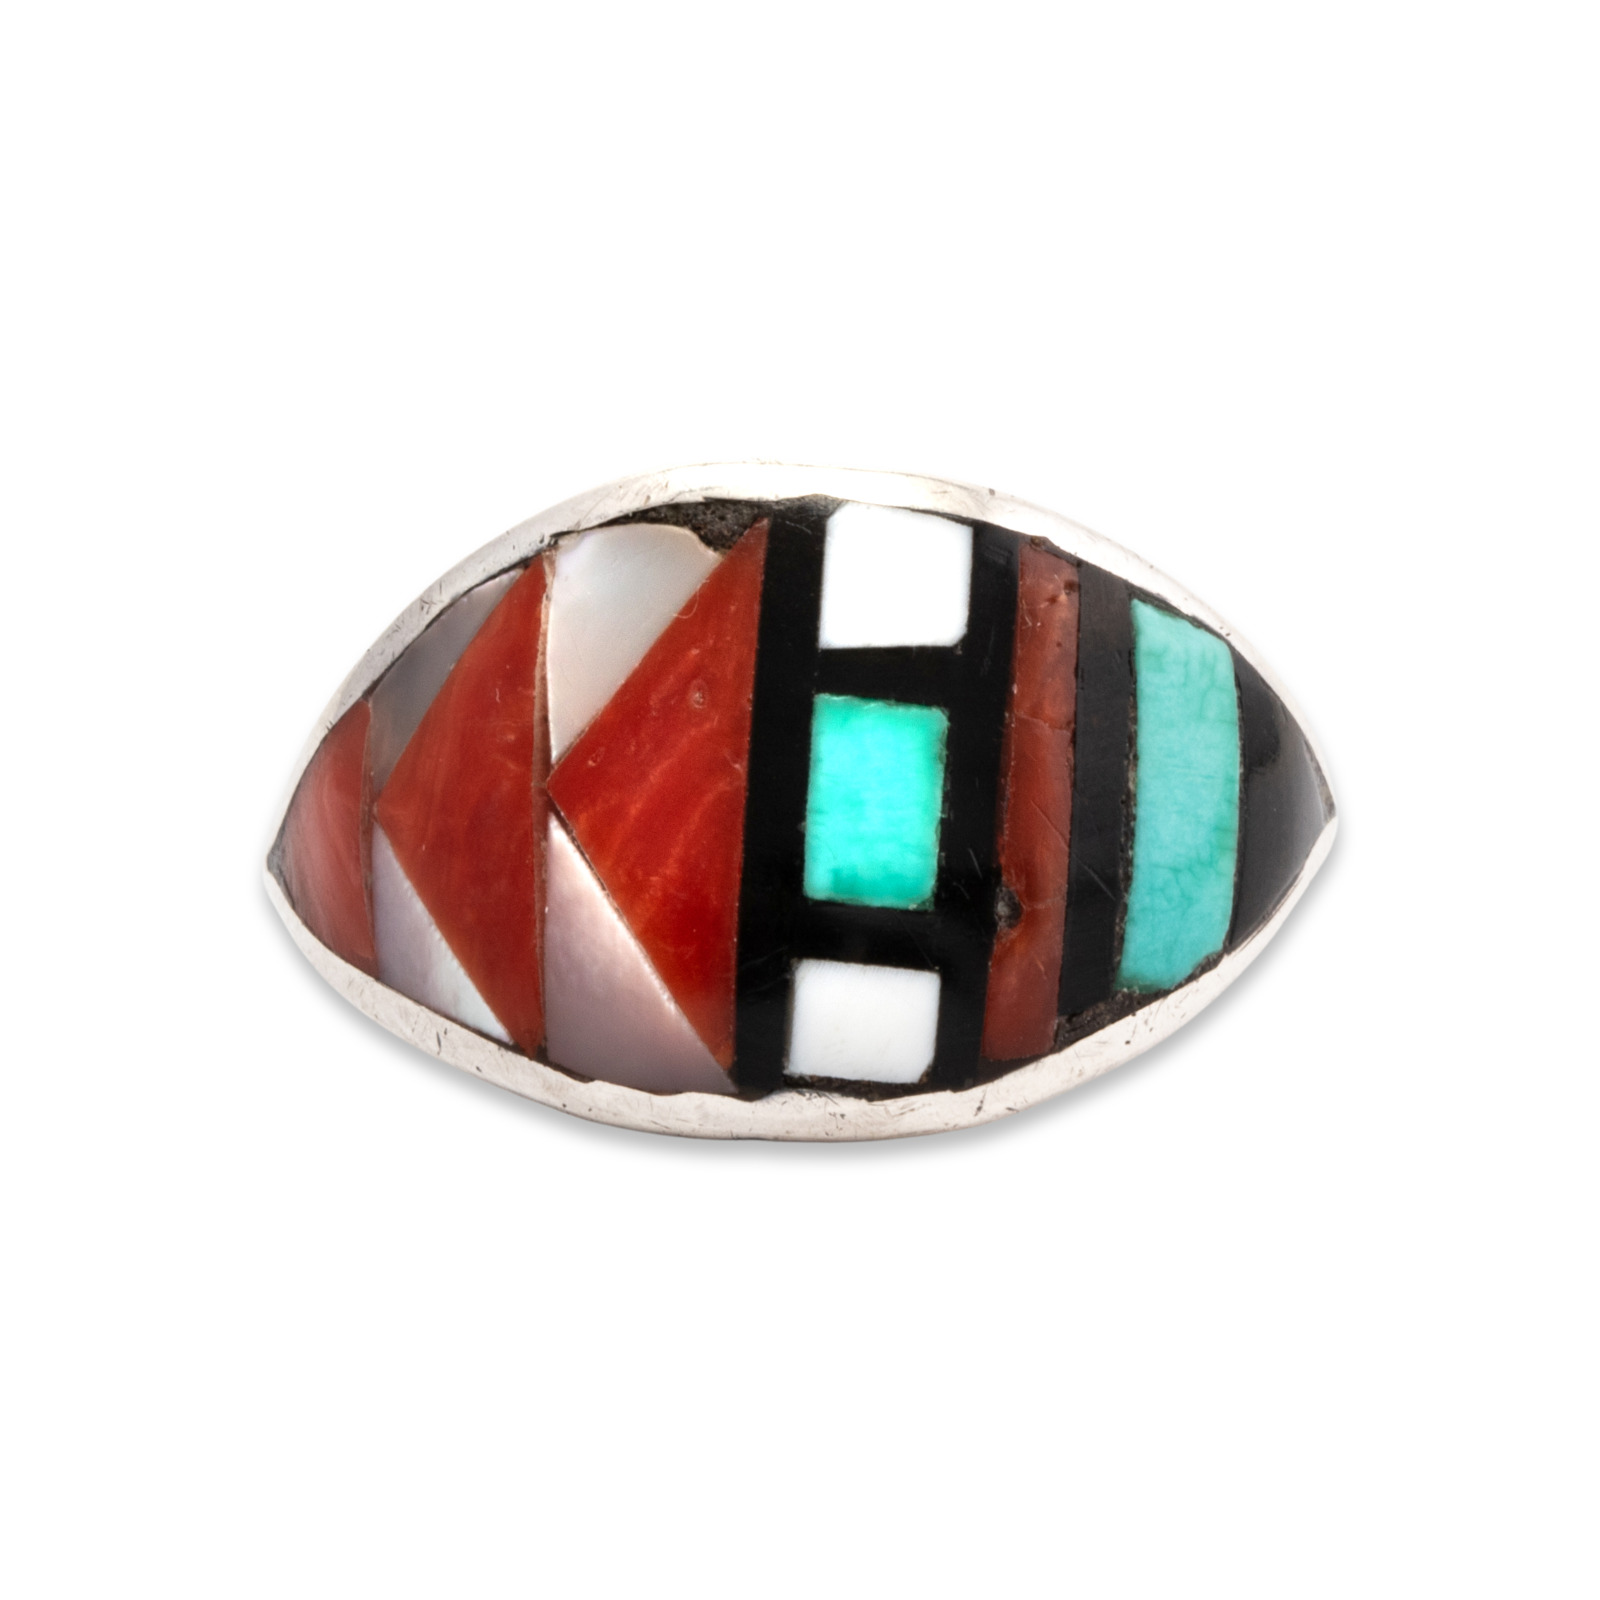 NATIVE JOHN & ROSALIE BOWANNIE ZUNI STERLING CORAL TURQUOISE INLAY RING 9